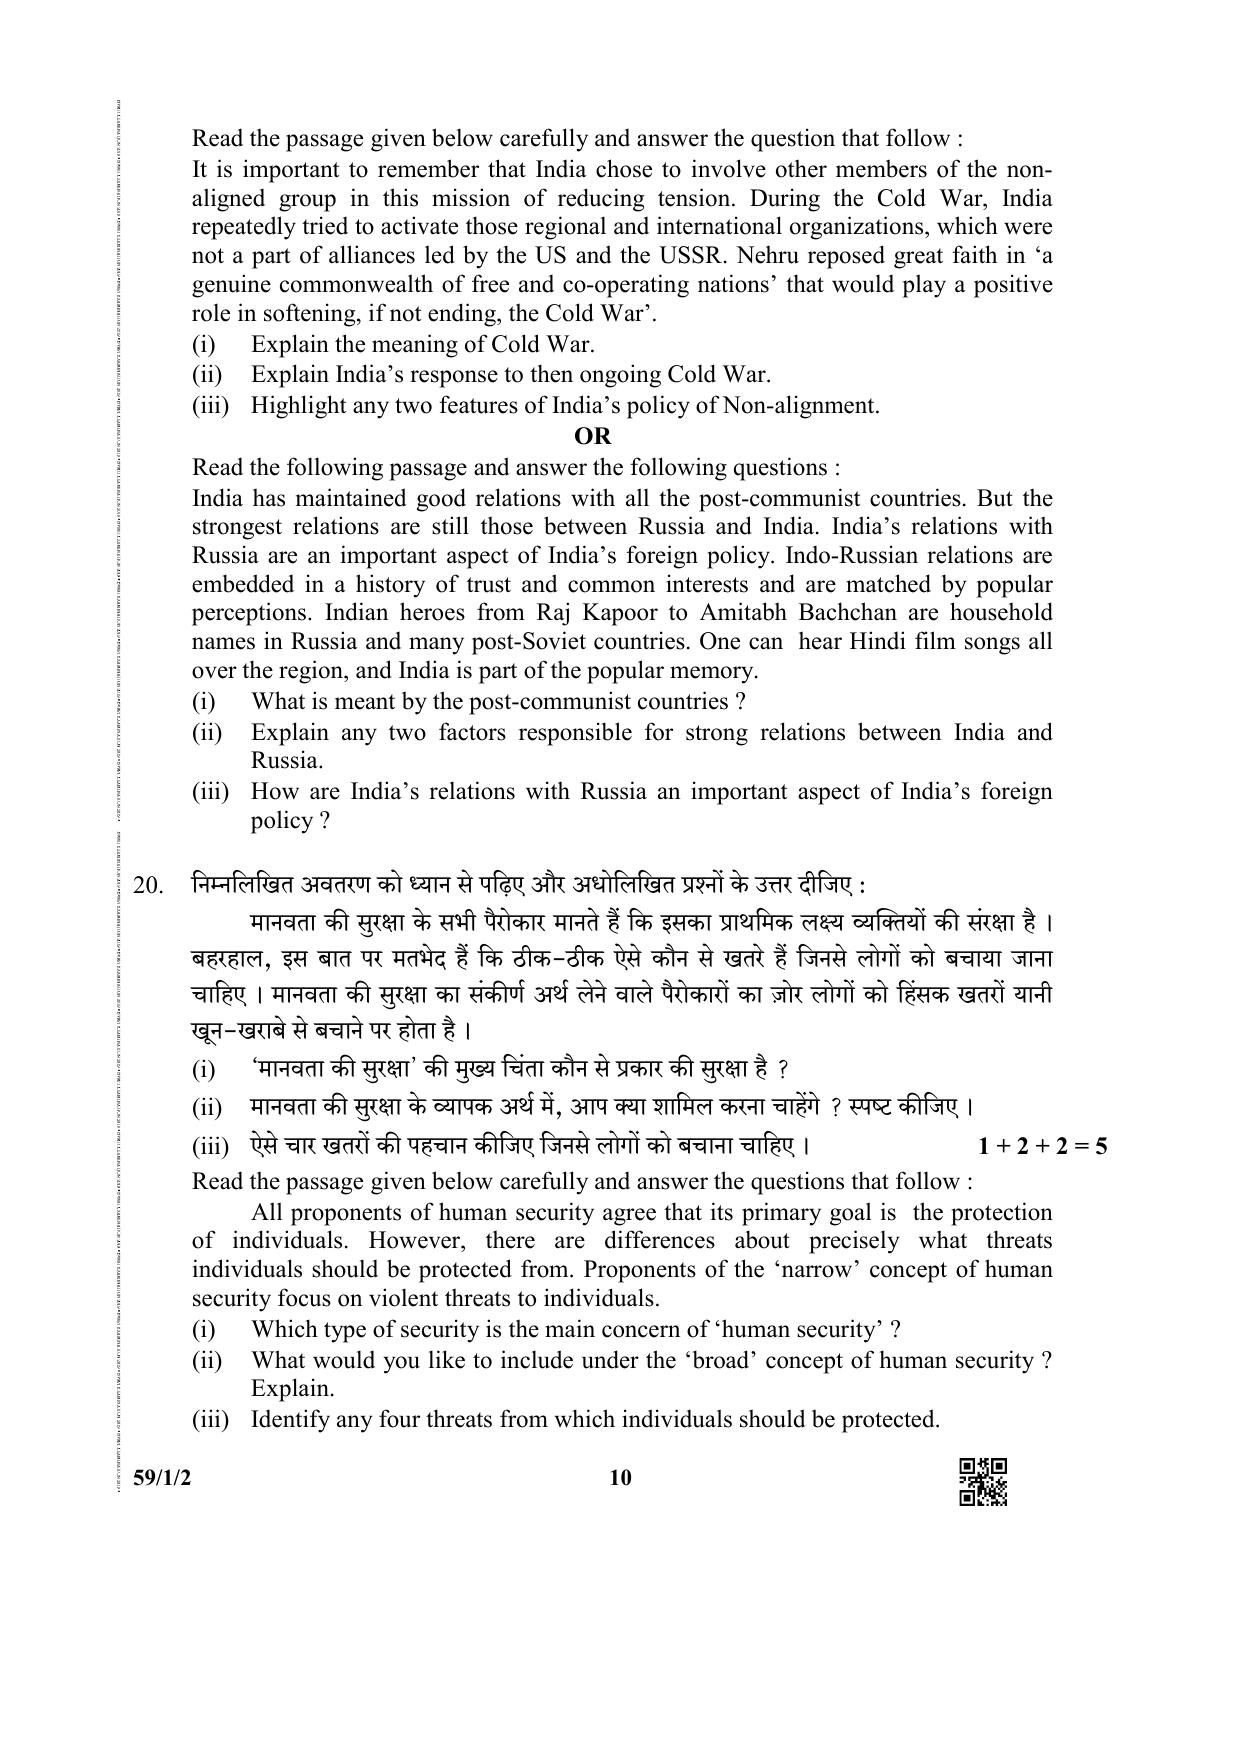 CBSE Class 12 59-1-2 (Political Science) 2019 Question Paper - Page 10